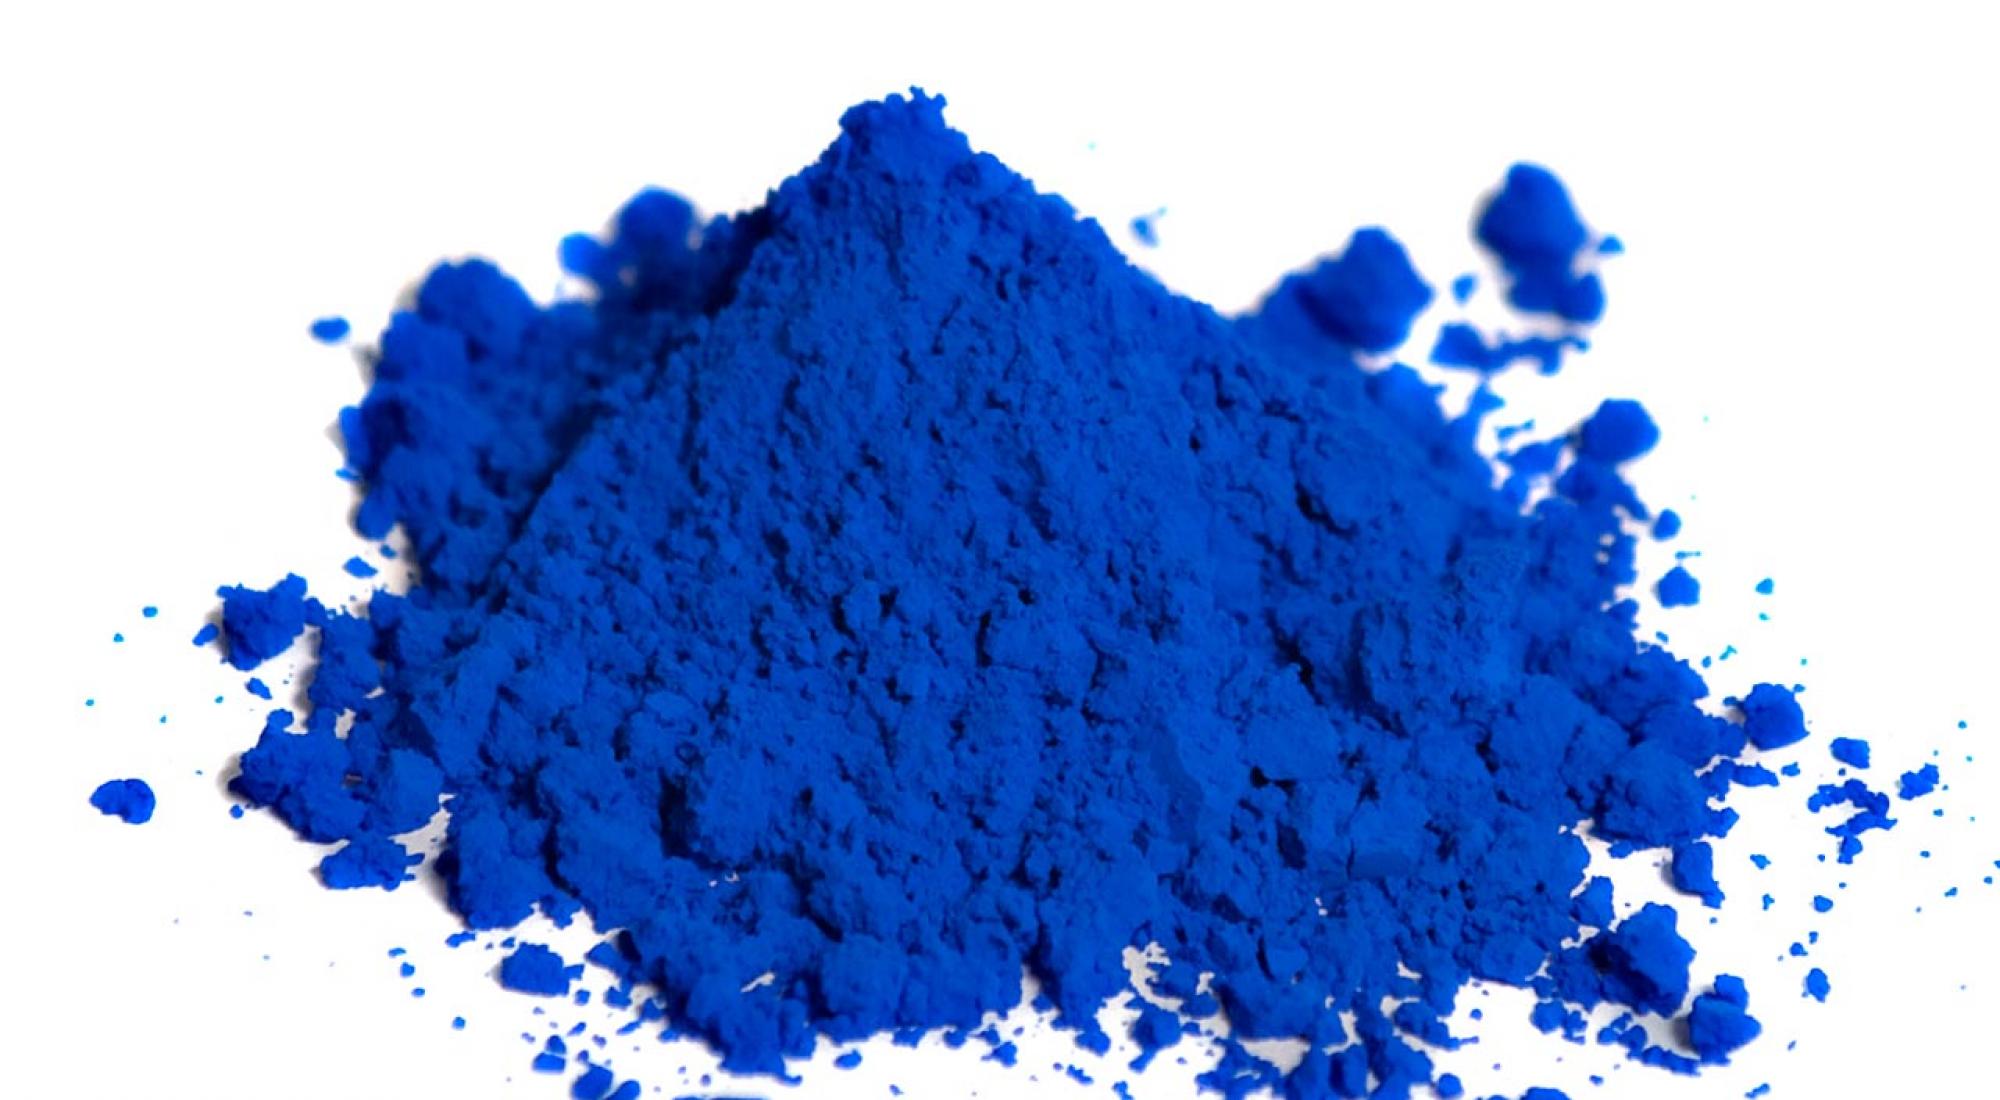 New blue pigment discovered at Oregon State earns EPA approval